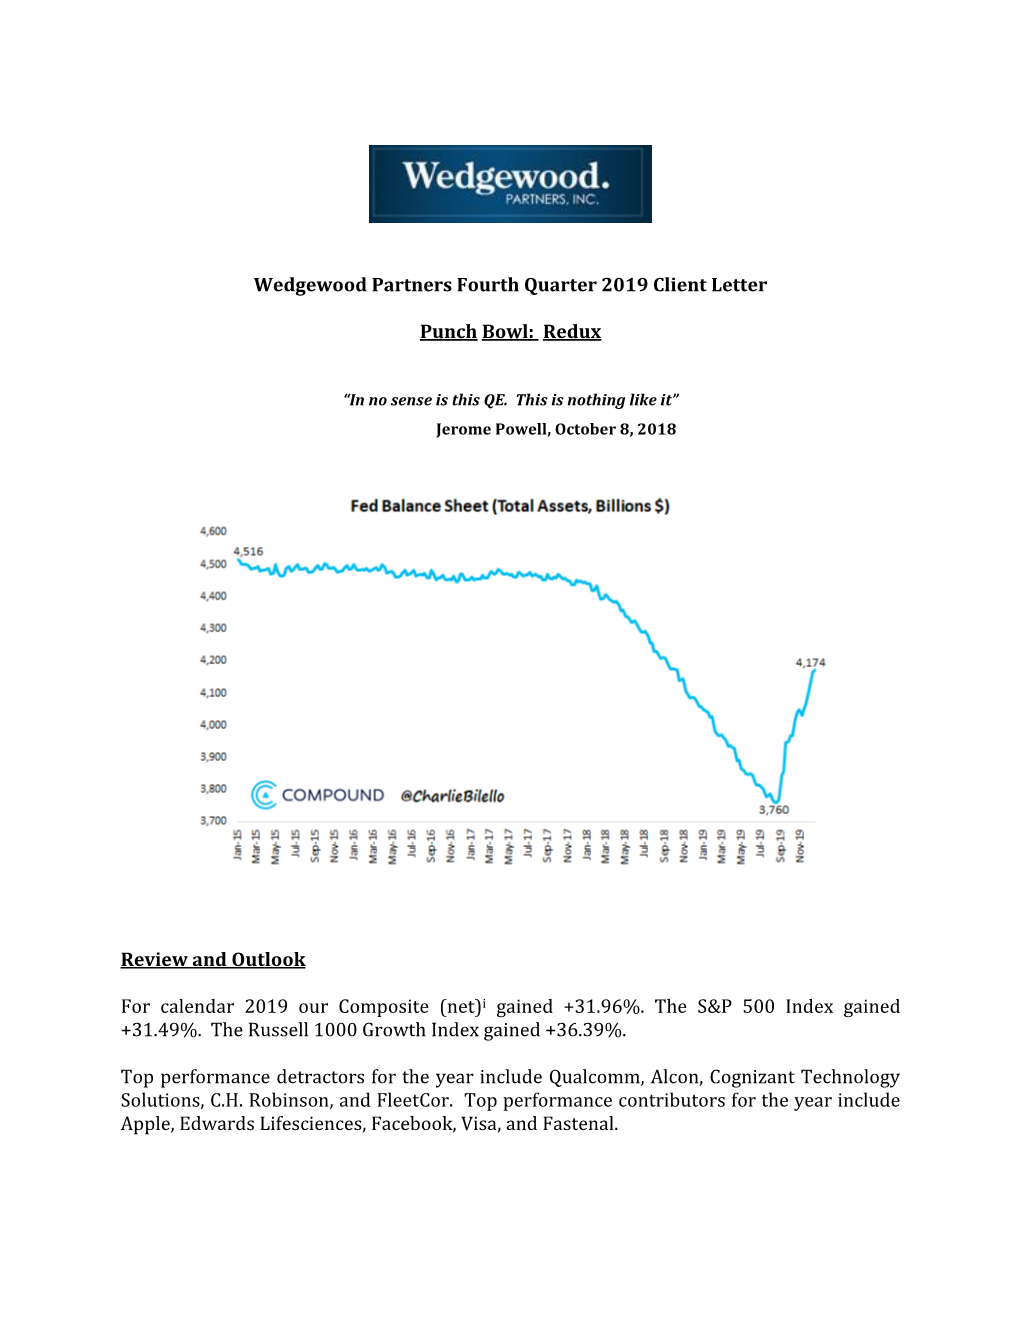 Wedgewood Partners Fourth Quarter 2019 Client Letter